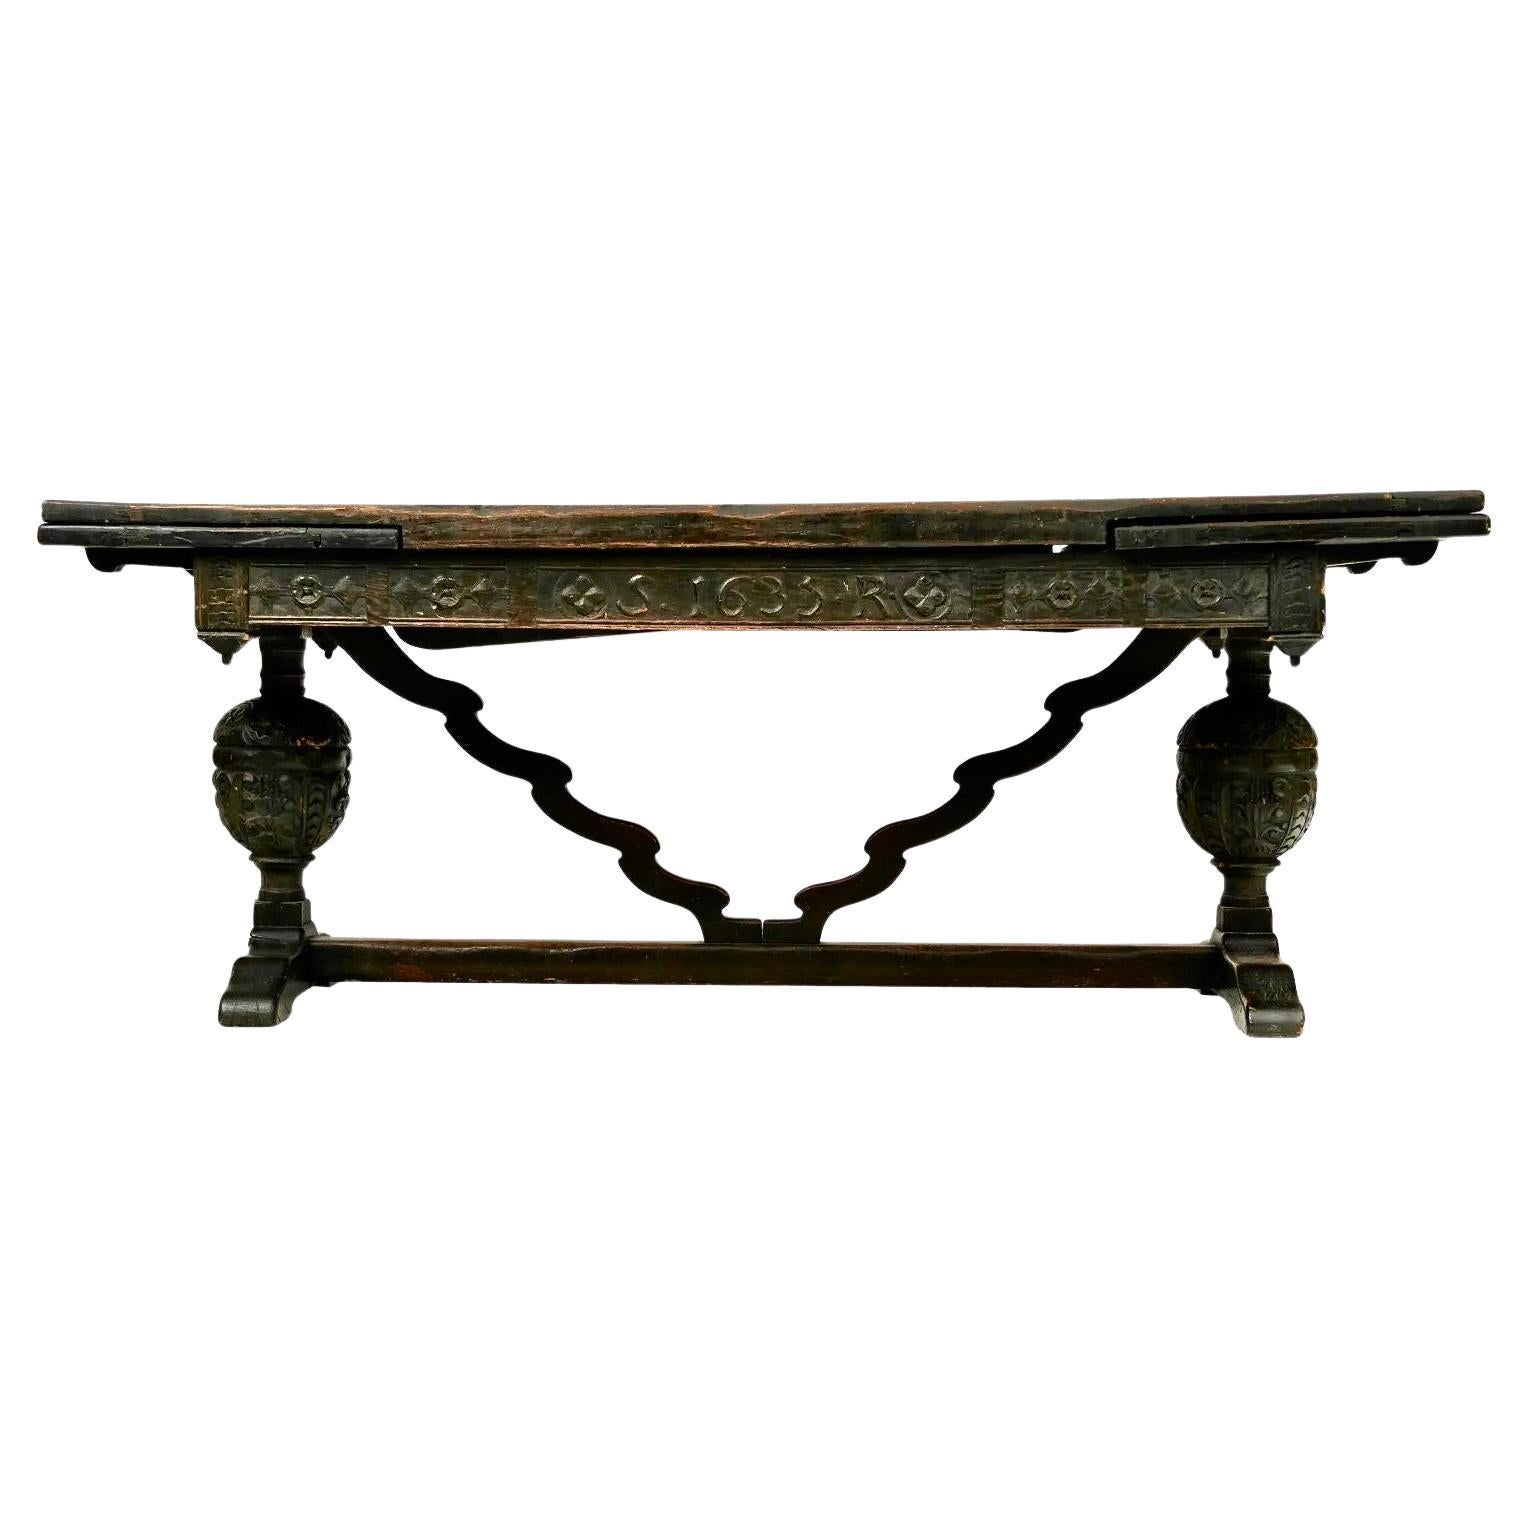 Early 17th Century English Jacobean Refectory or Withdraw Table